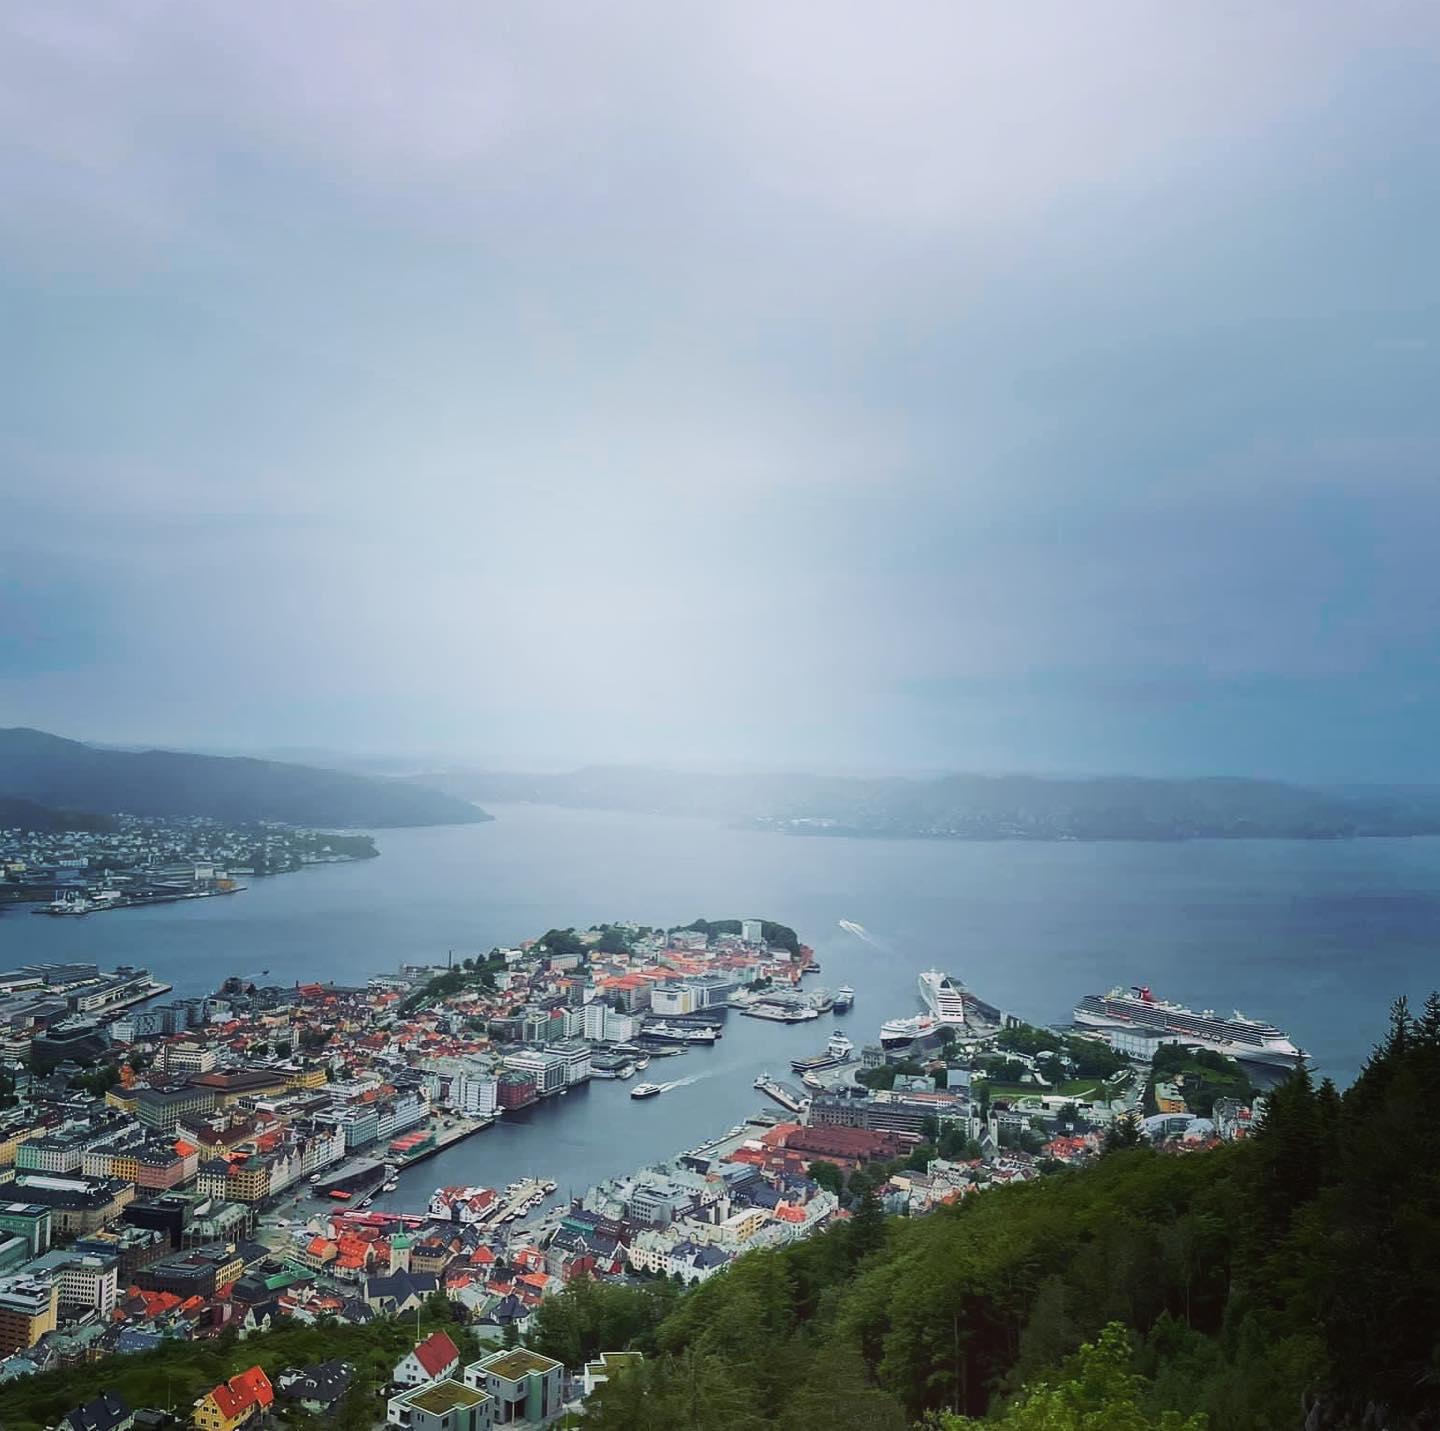 What a difference a good Insta filter makes 😜 Same old grey #Bergen from the top of the #funicular hill, as taken by my friend Erin. This and Olden skylift are musts though obv much better on a gorgeous sunny day.. none of which we have had other than our first Seaday. But I guess that is the risk you take booking #Norway :) I would still definitely recommend sailing Norway… come later in the autumn and you may catch the #aurora aka #northerlights. Right now no chance of the above as we are visiting the land of the #midnightsun 😜⚓️
—————————————-
#carnivalpride #ship #funship #carnivalcruise #cruise #fjords #vitaminsea #scandinavia #visitnorway